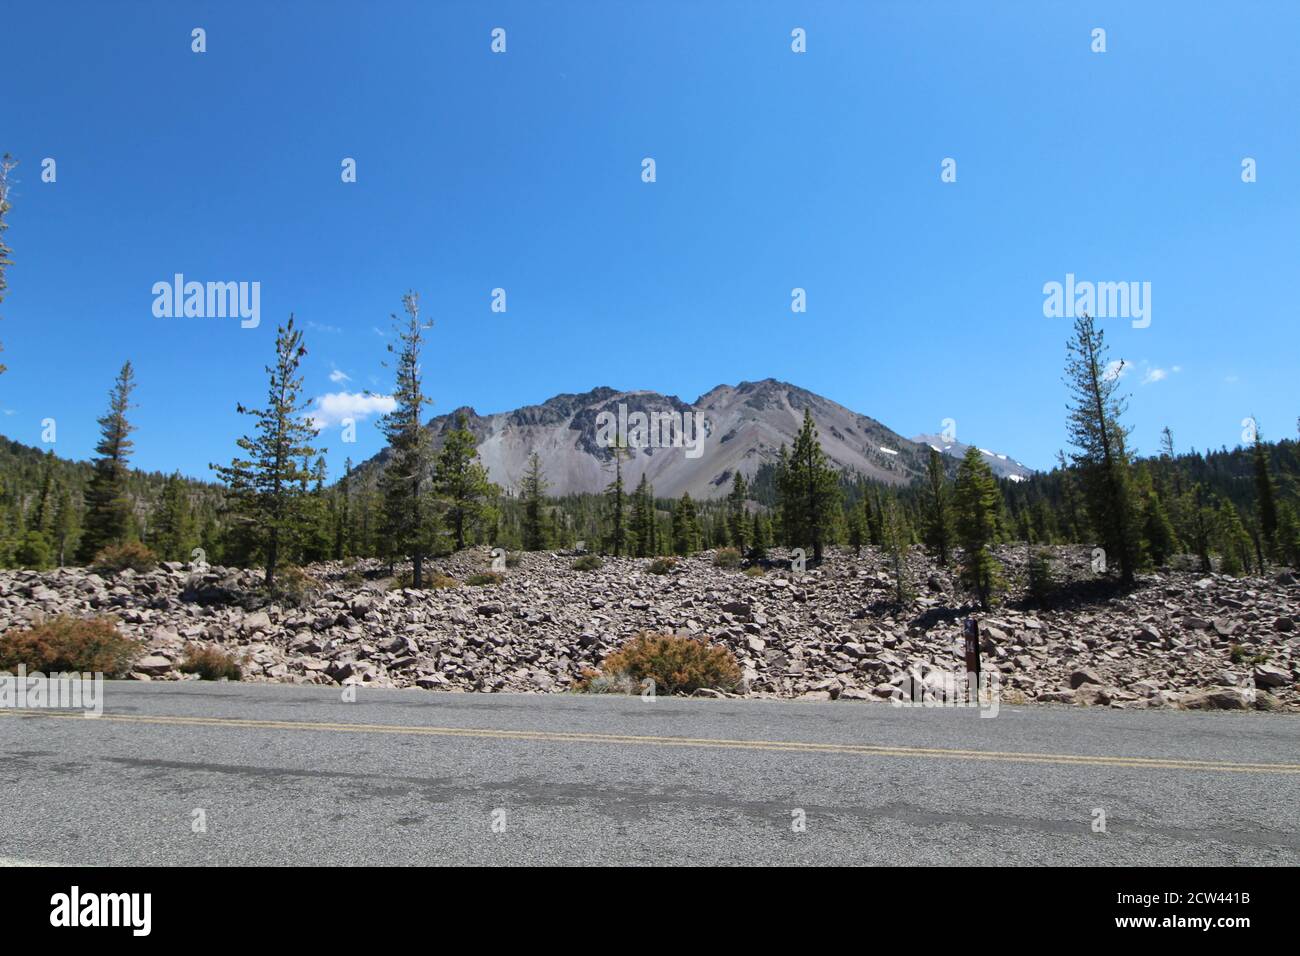 Wide low angle shot of the Lassen Volcanic National Park in California, USA Stock Photo